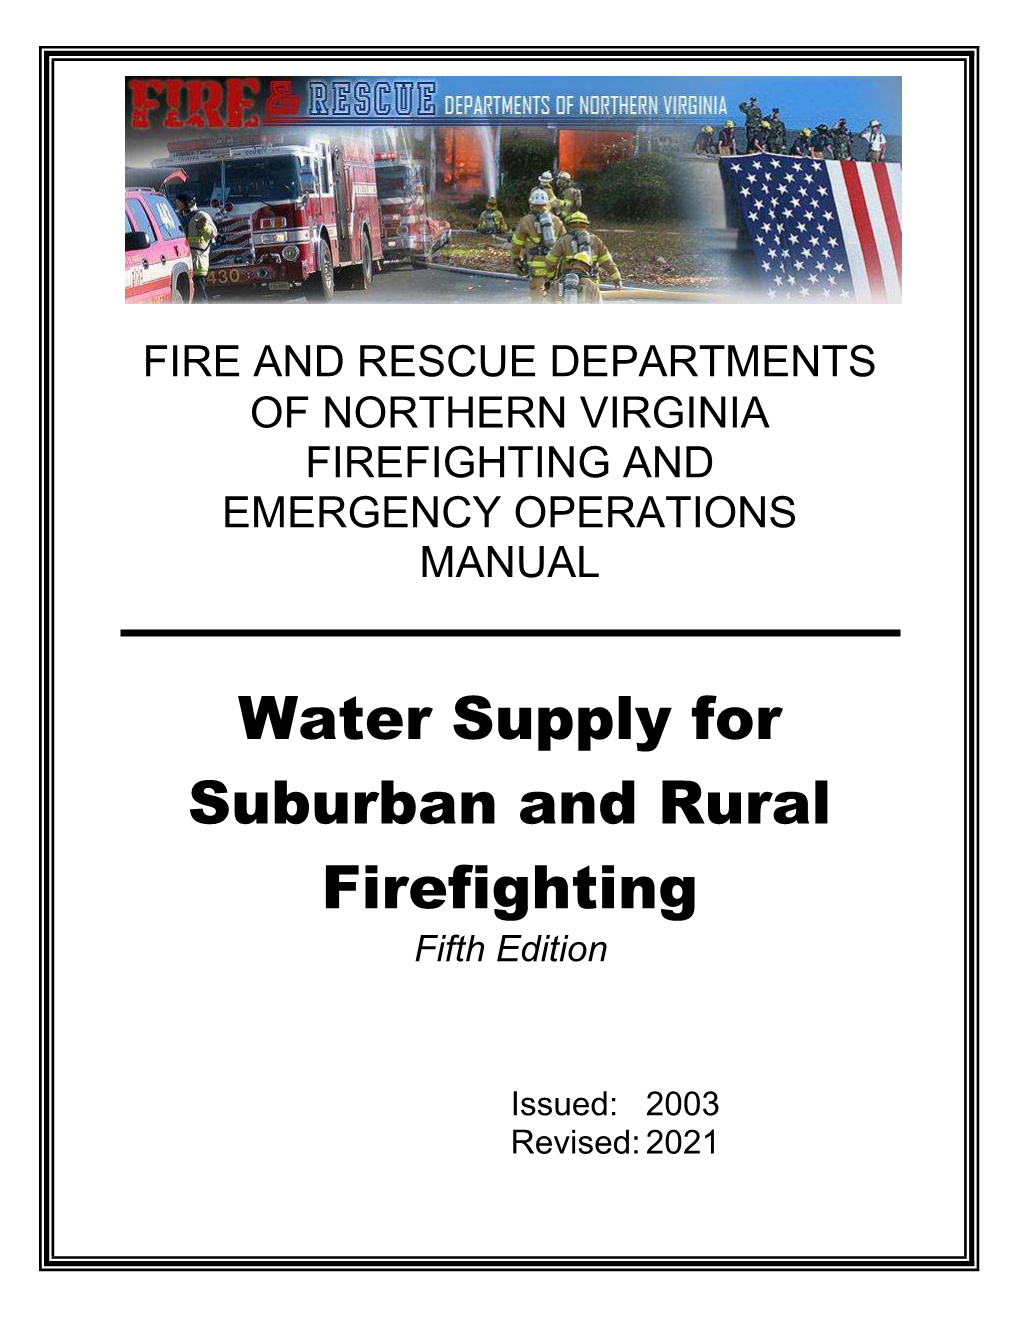 Water Supply for Suburban and Rural Firefighting Fifth Edition